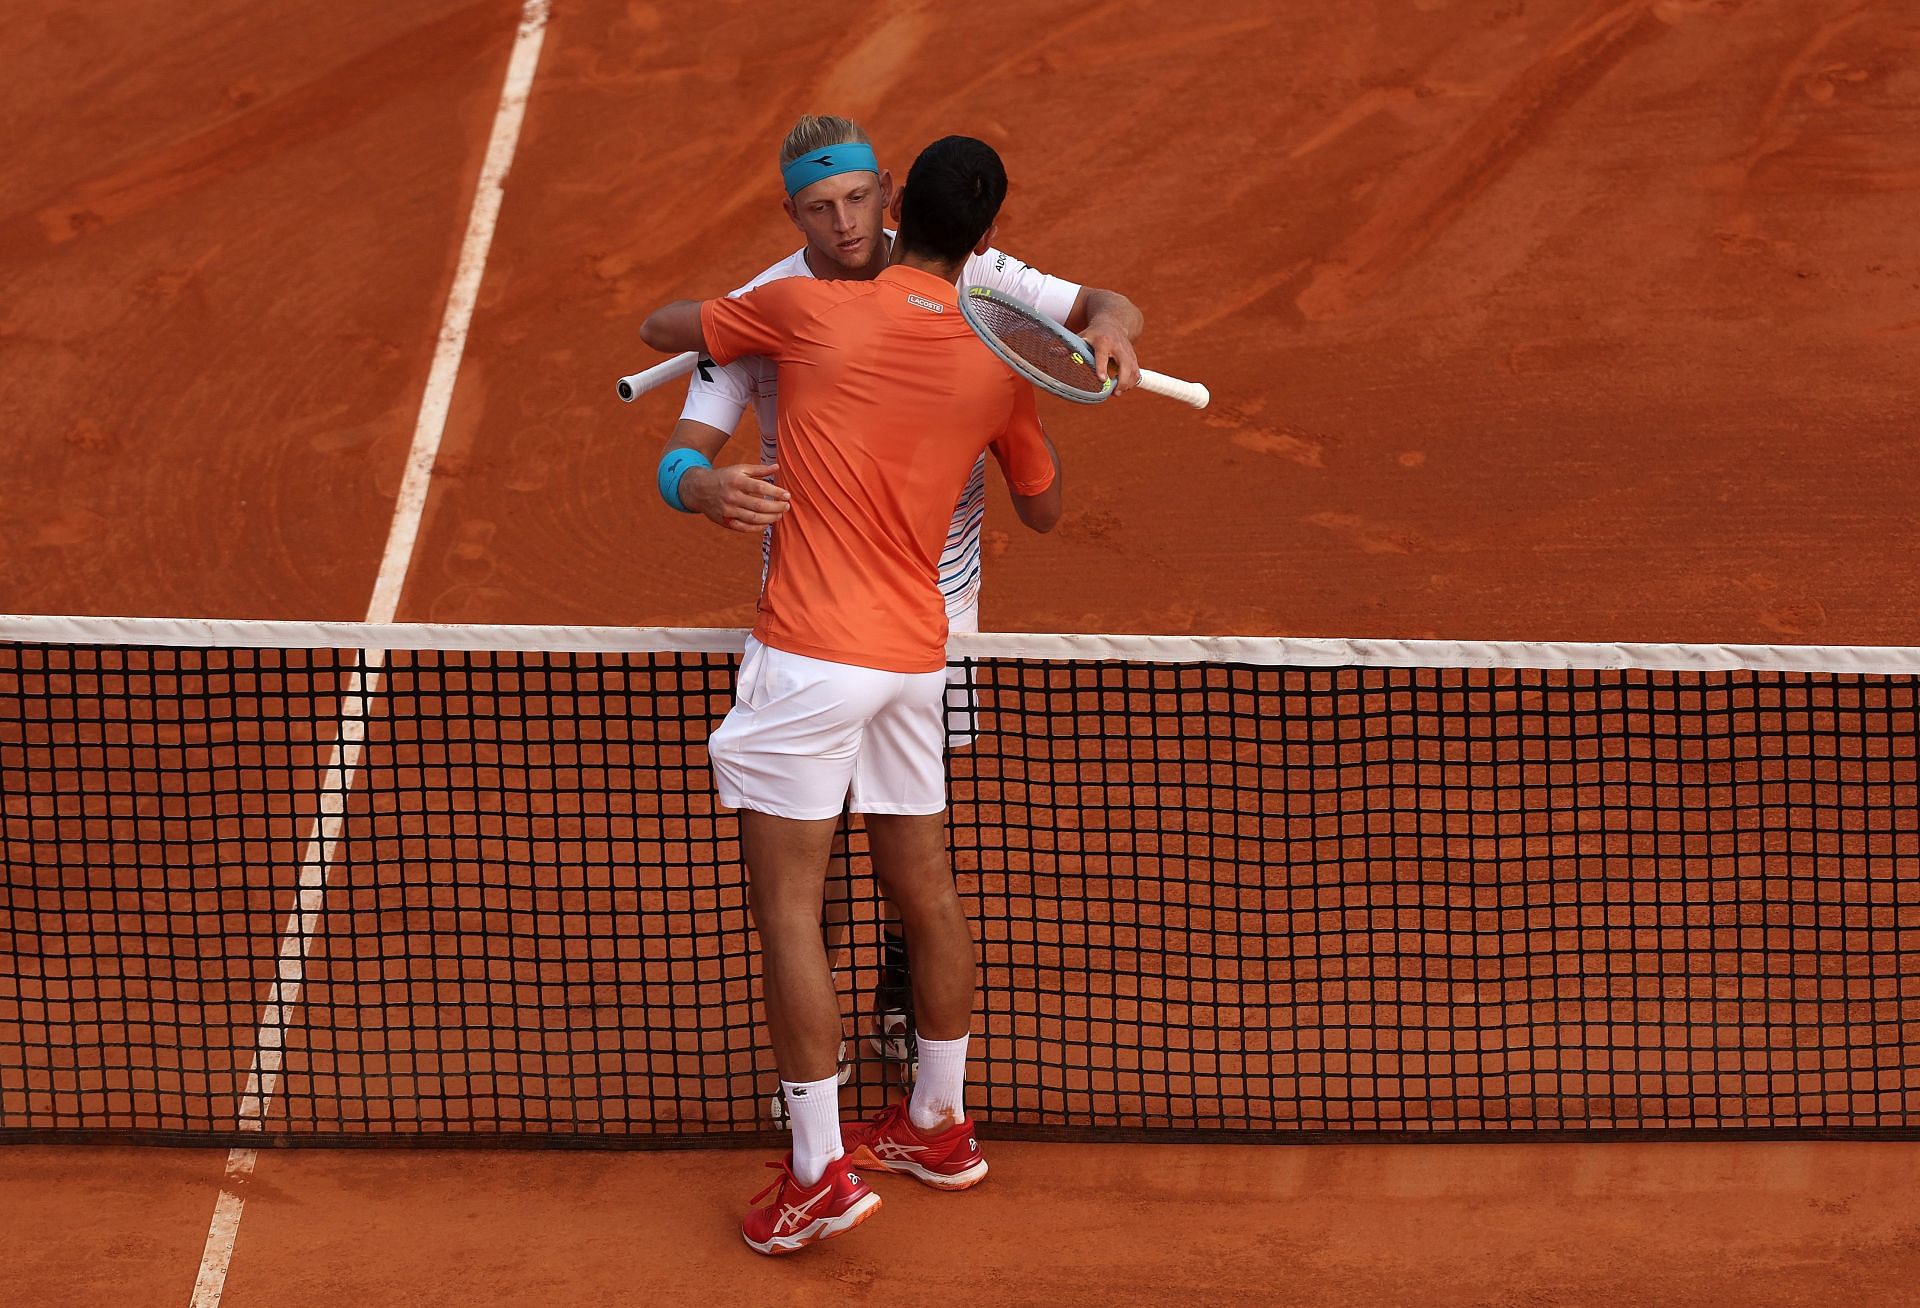 Djokovic and Davidovich Fokina embrace after their match at the 2022 Rolex Monte-Carlo Masters